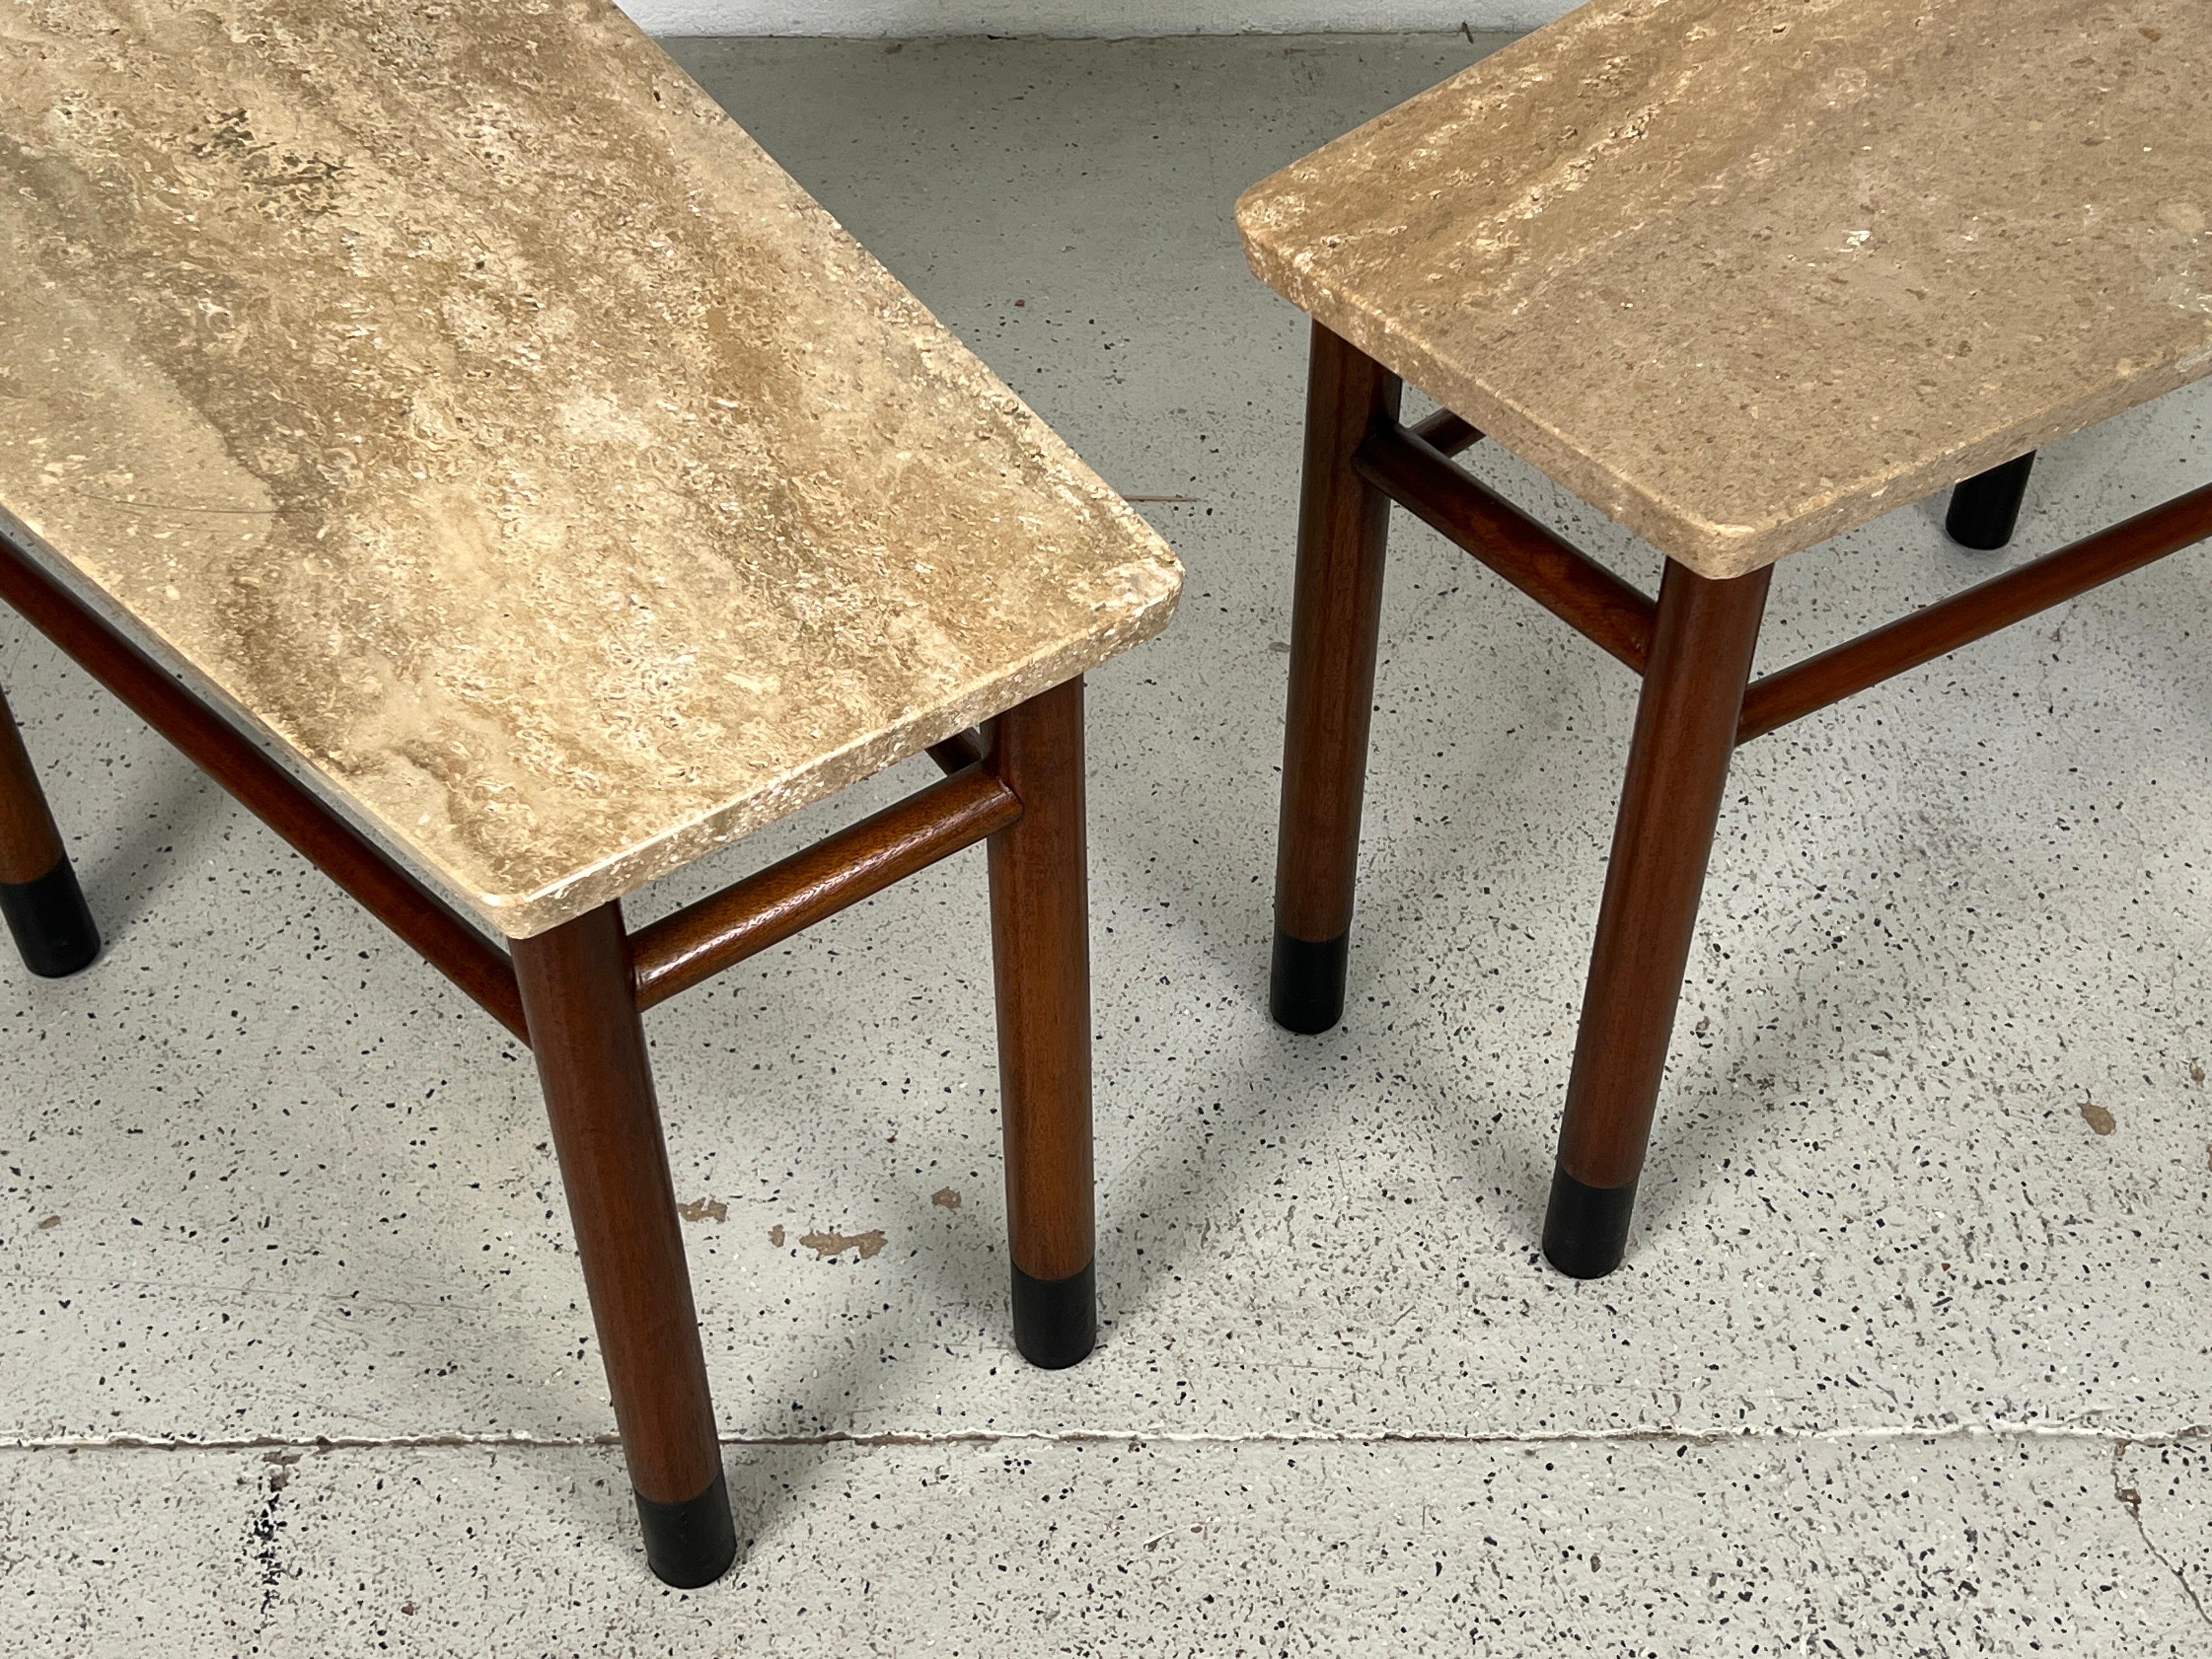 Pair of Wedge Shaped Travertine Tables by Edward Wormley for Dunbar For Sale 13